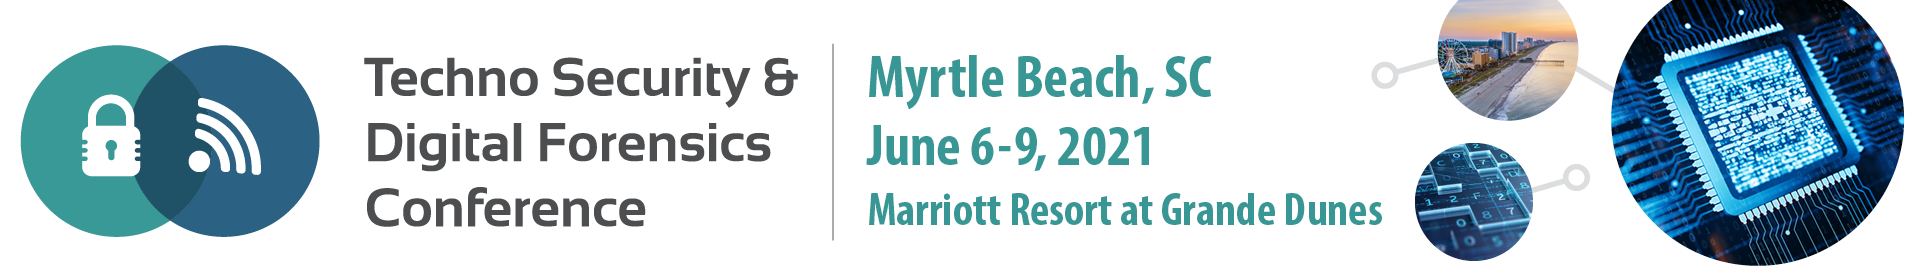 2021 Myrtle Beach Techno Security & Digital Forensics Conference Event Banner